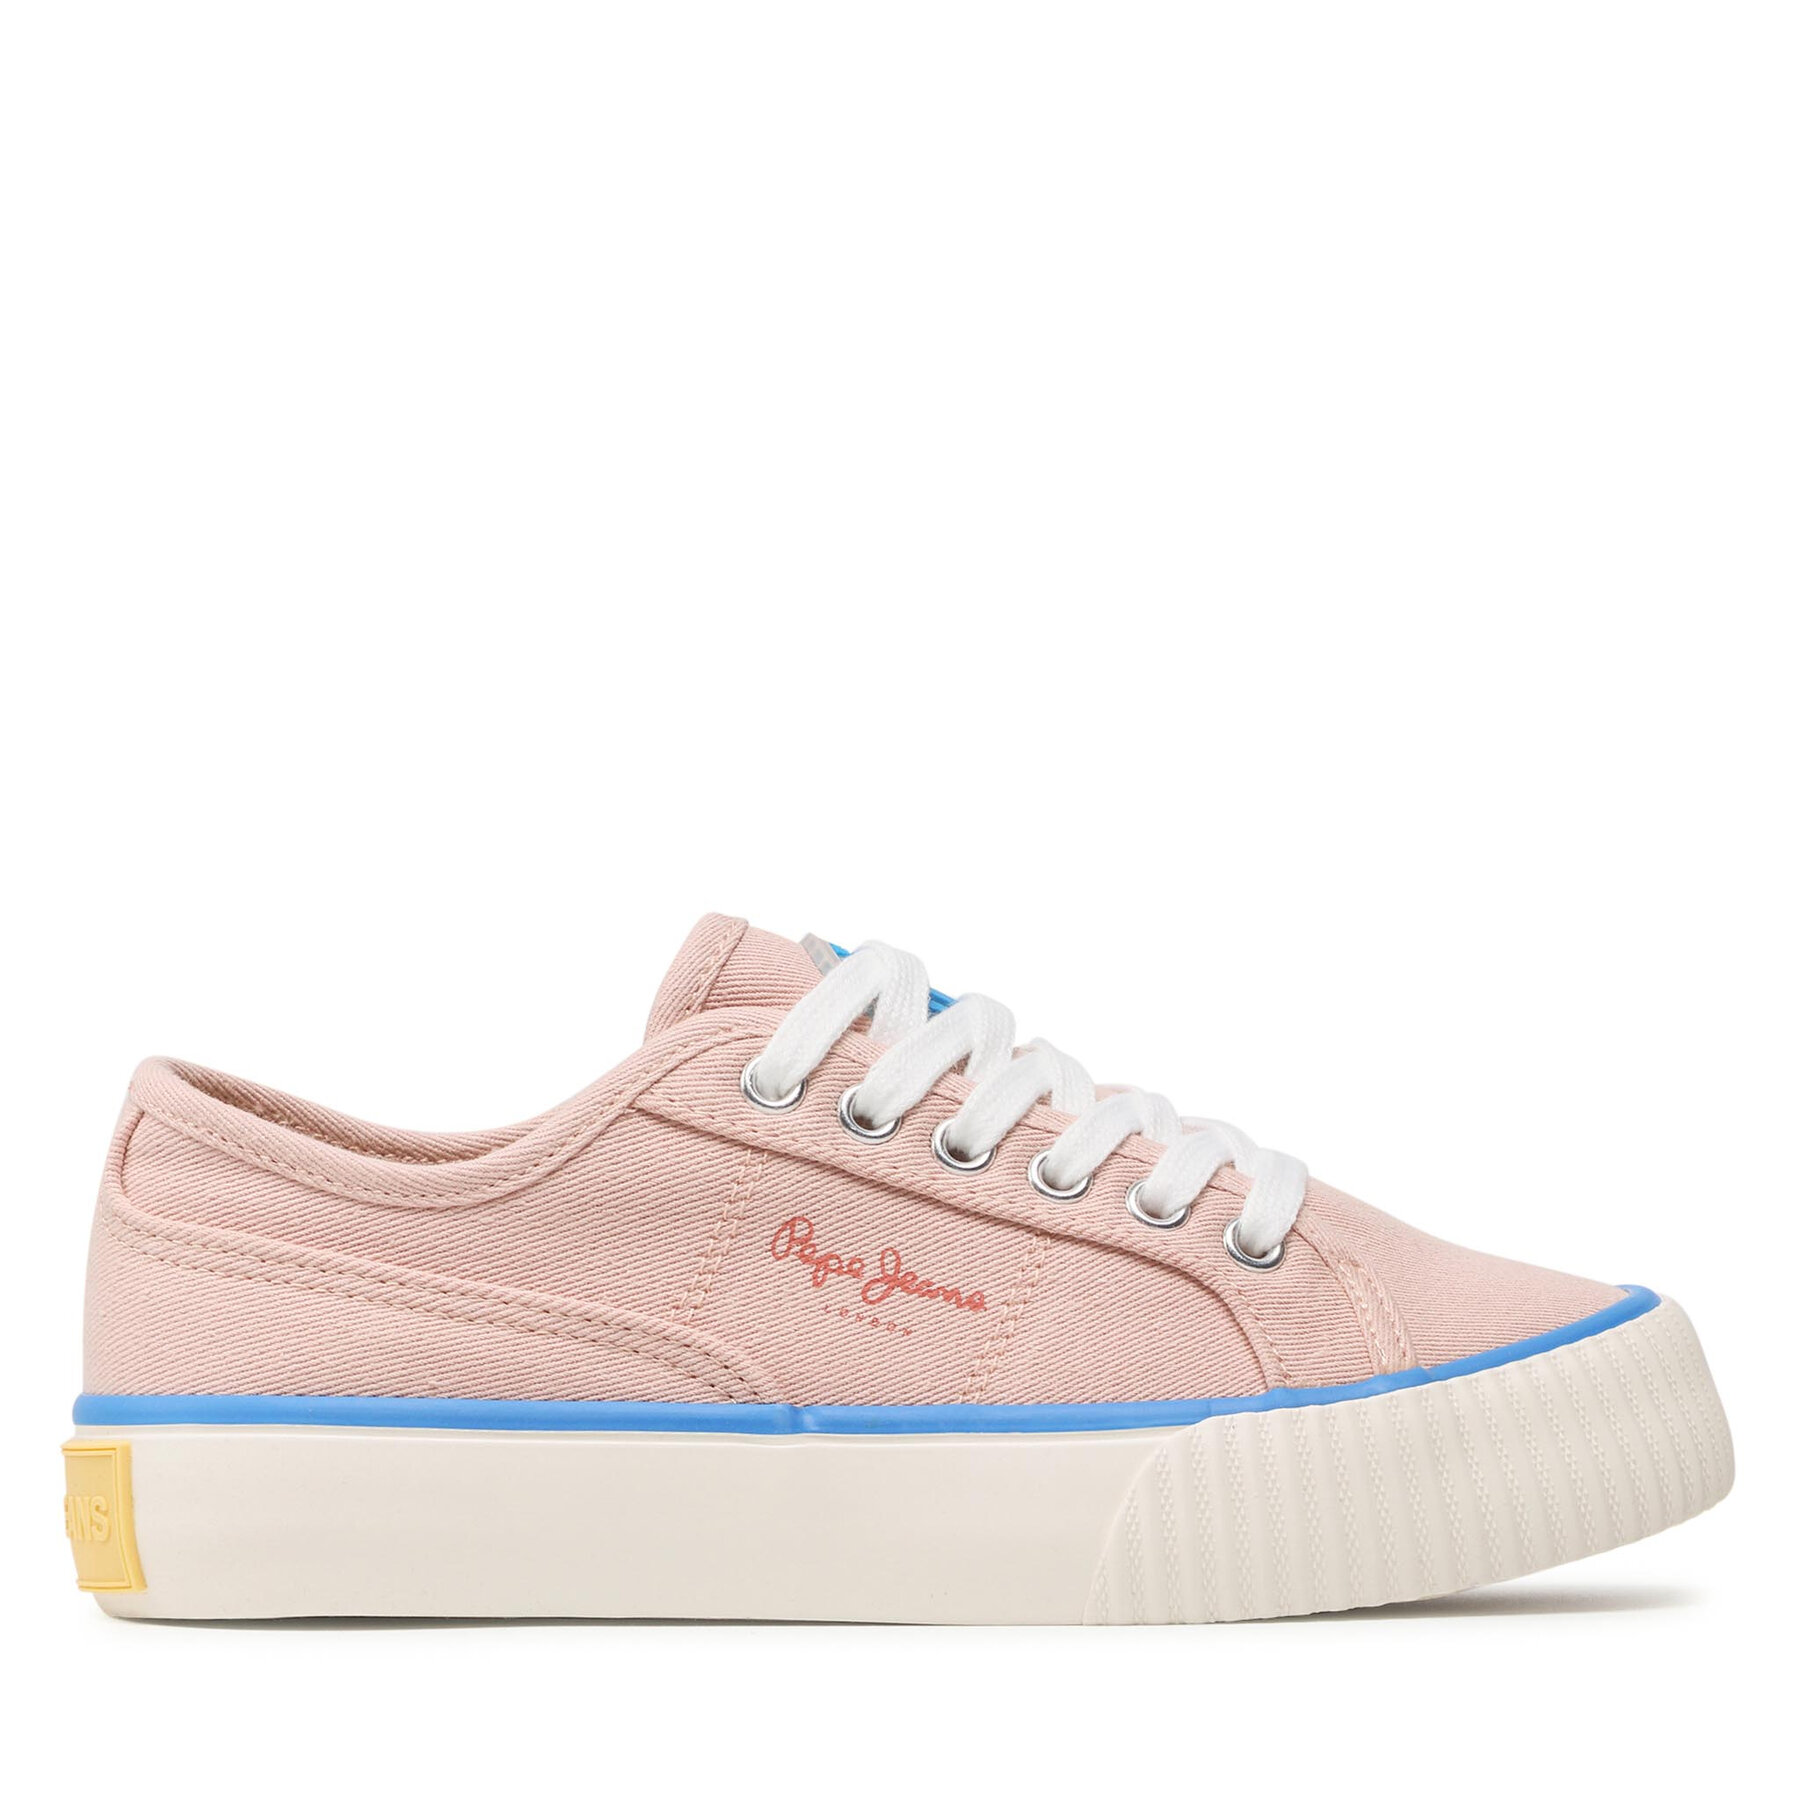 Turnschuhe Pepe Jeans PGS30542 Mauve Pink 319 von Pepe Jeans